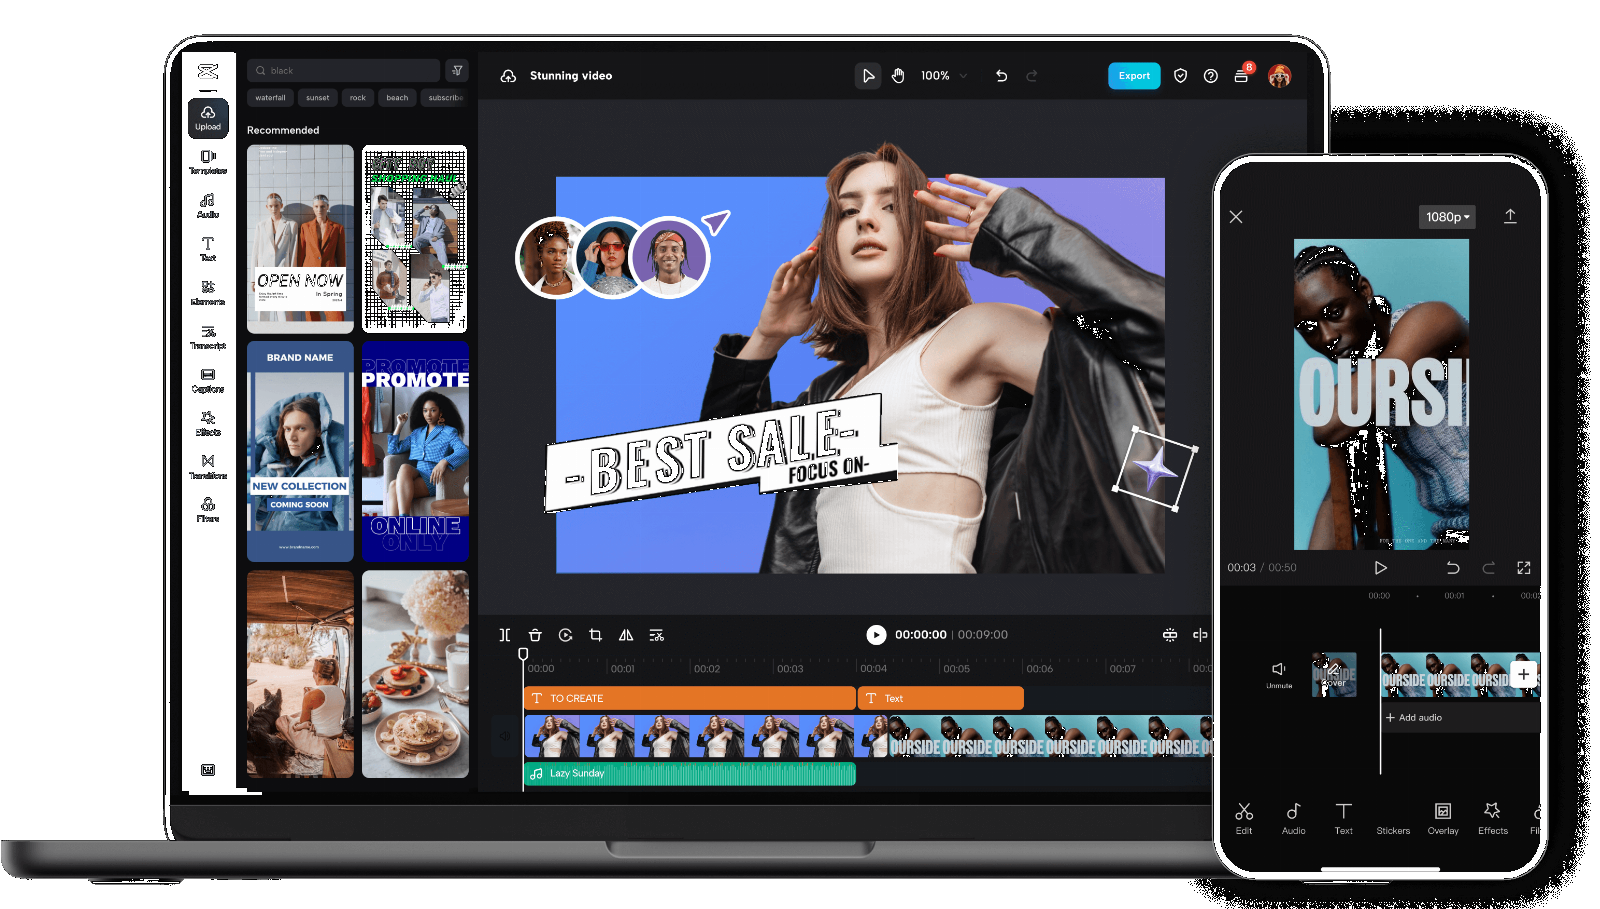 ByteDance’s video editor CapCut targets businesses with AI ad scripts and AI-generated presenters